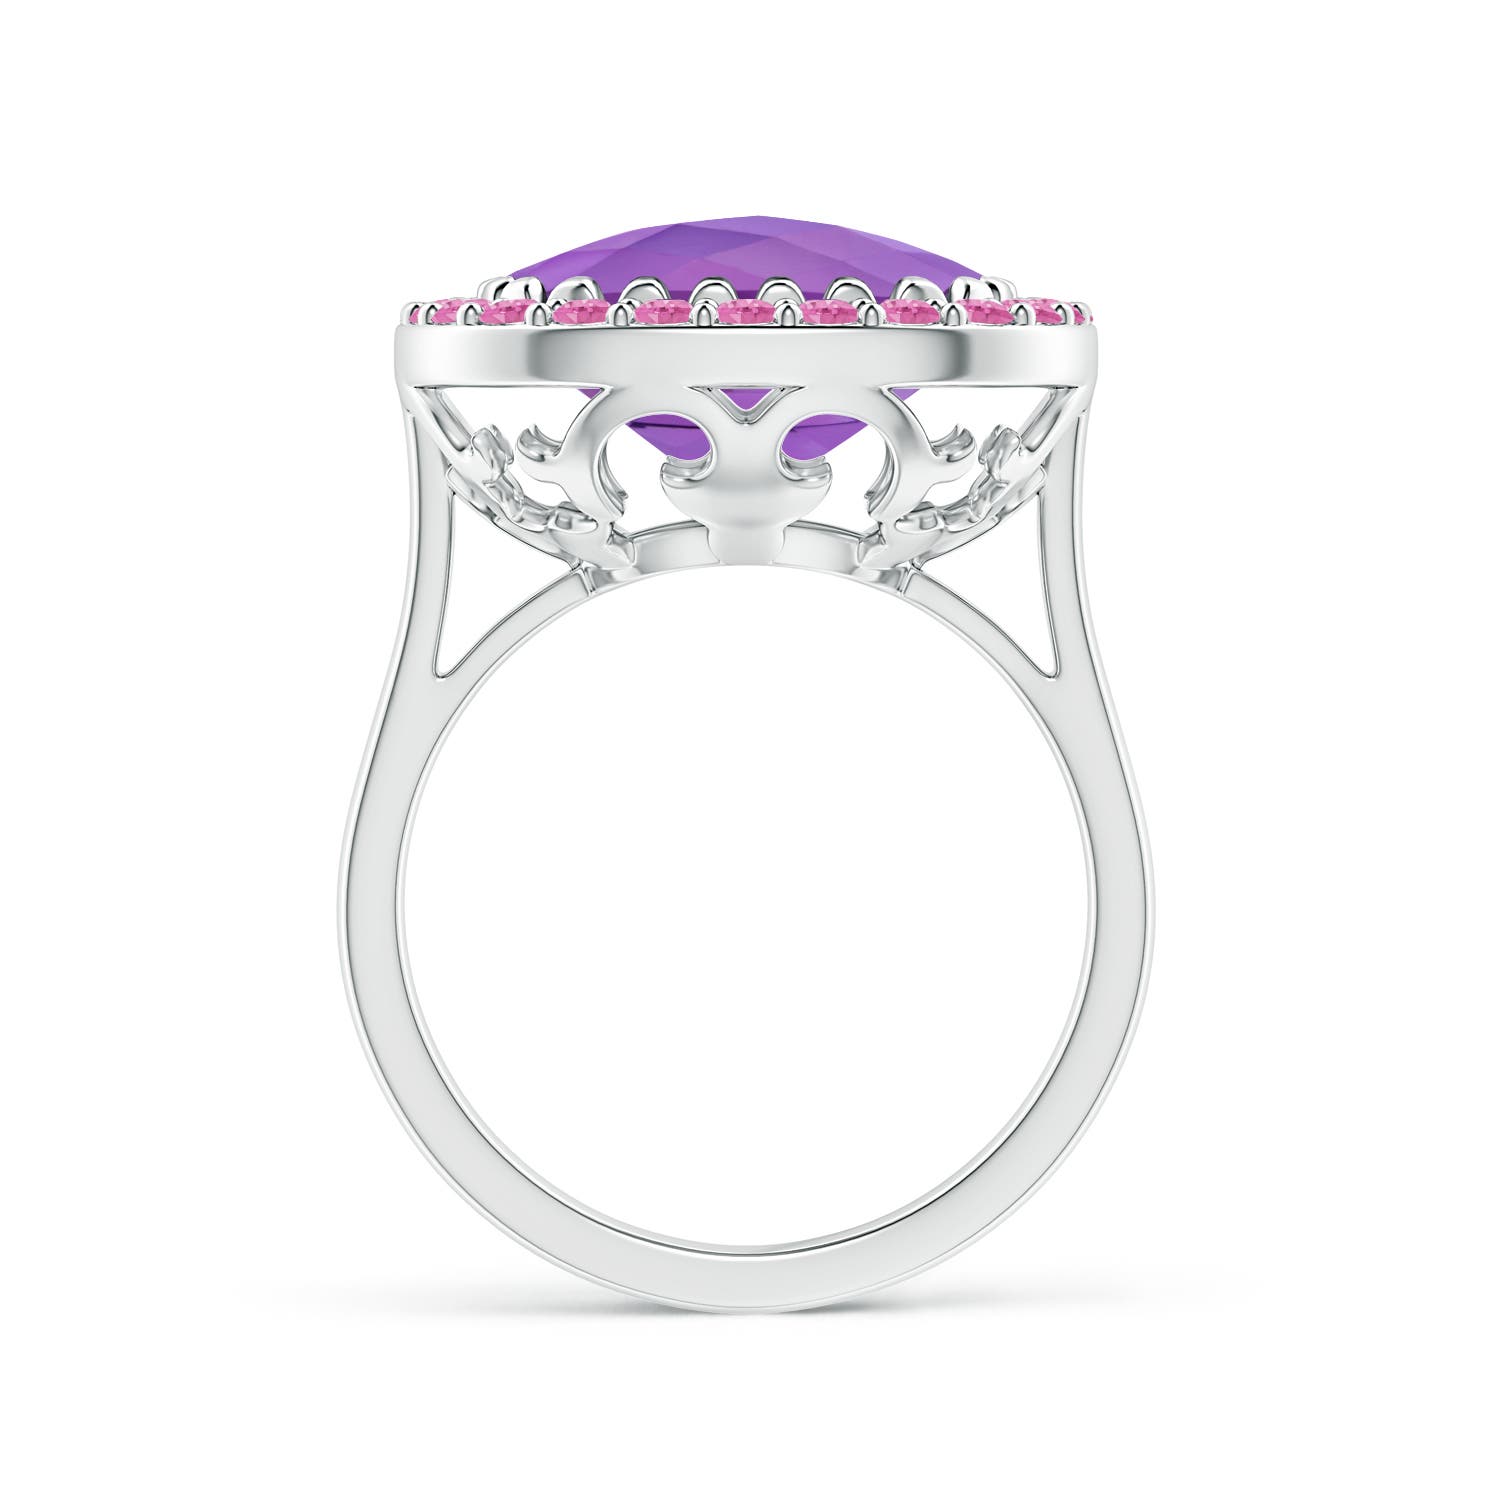 AA - Amethyst / 6.98 CT / 14 KT White Gold